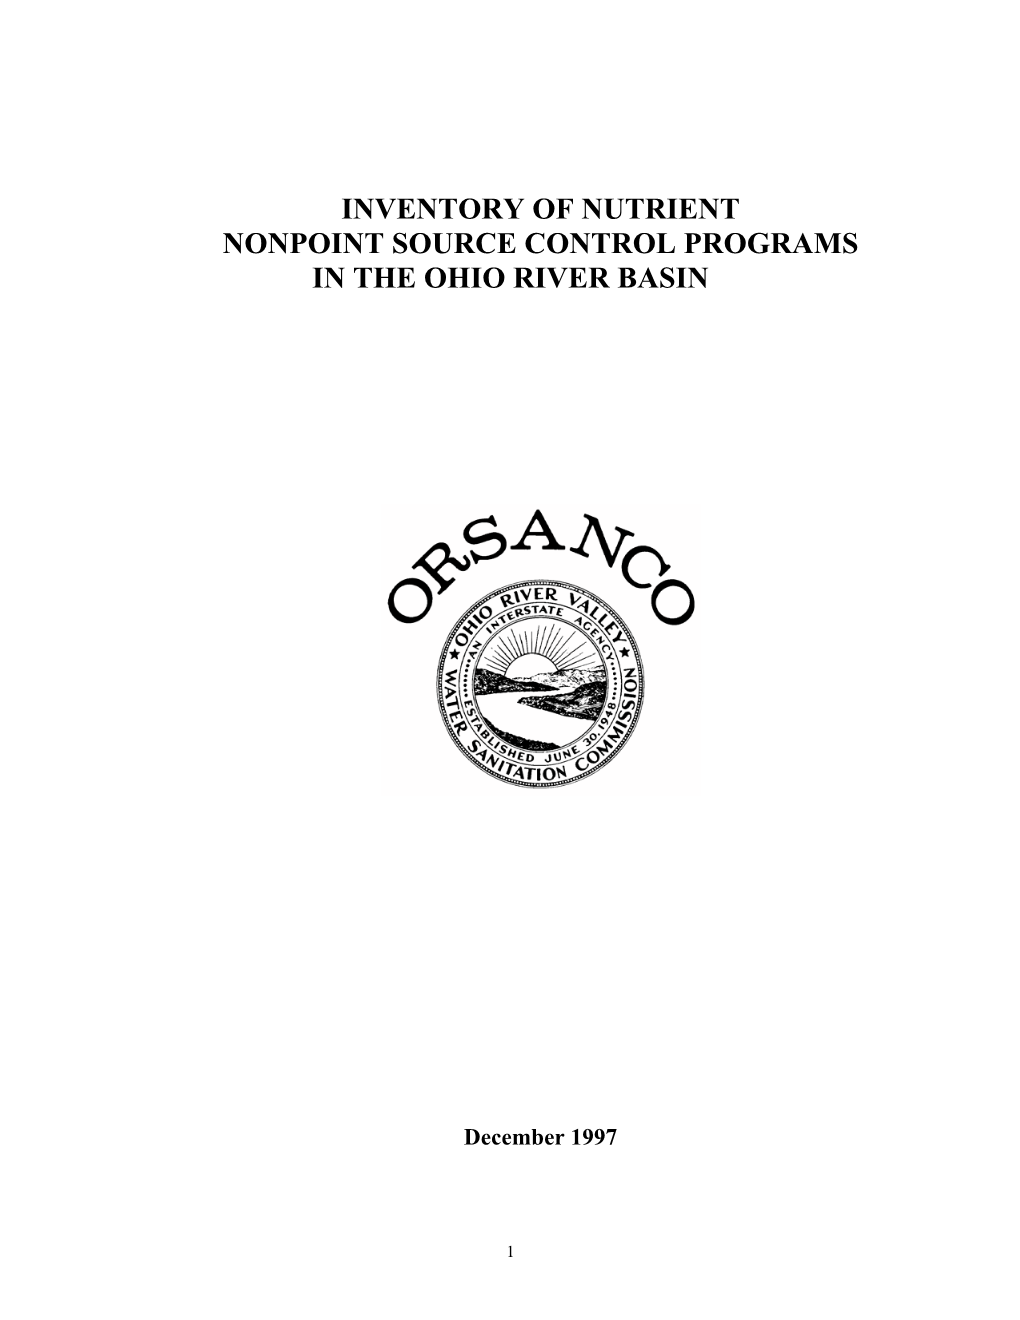 Inventory of Nutrient Nonpoint Source Control Programs in the Ohio River Basin